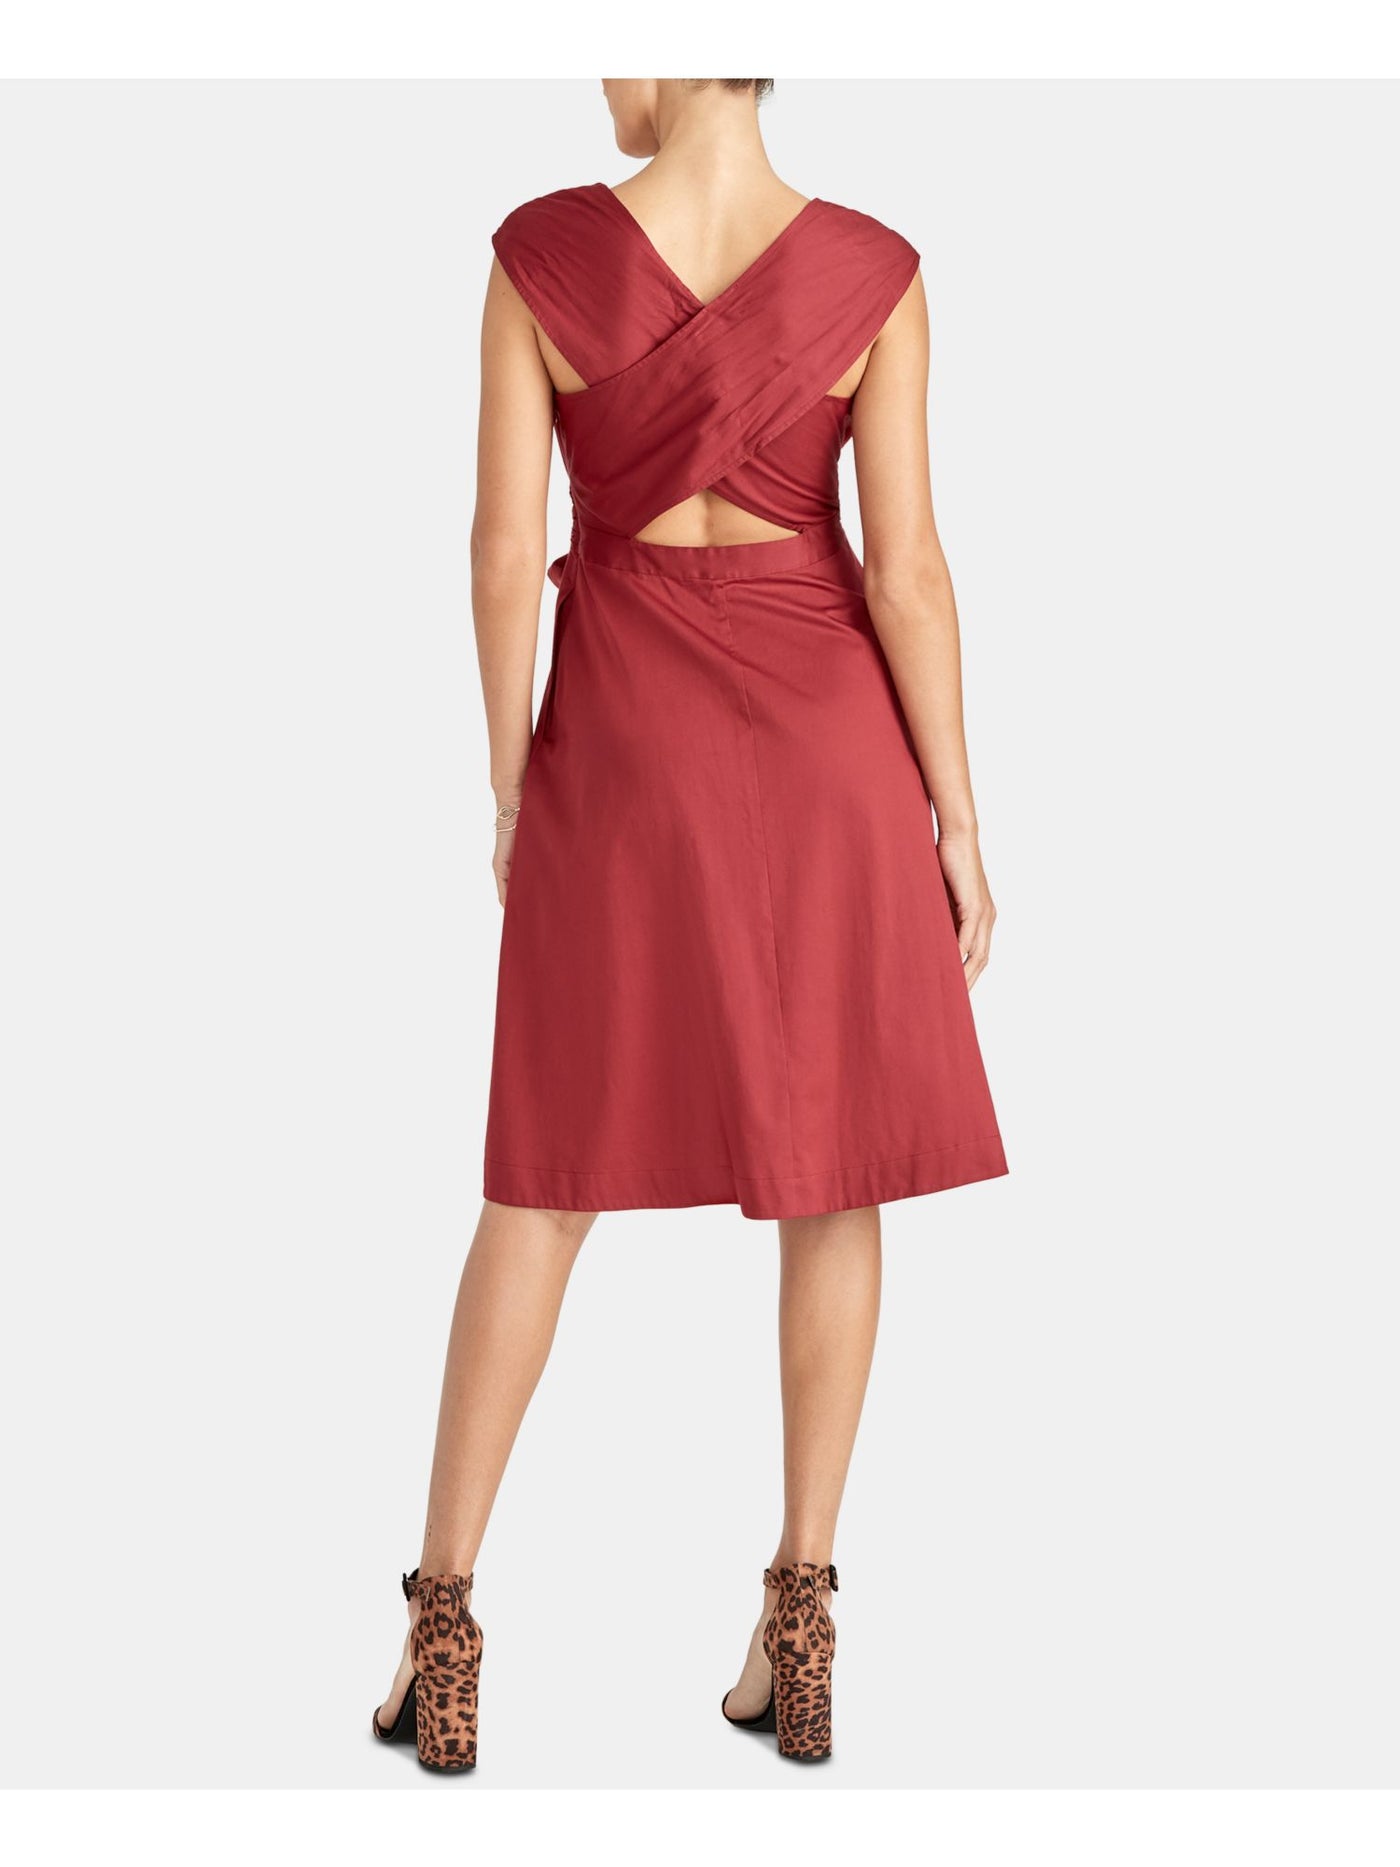 RACHEL ROY Womens Red Belted Sleeveless V Neck Knee Length Wear To Work Fit + Flare Dress 10